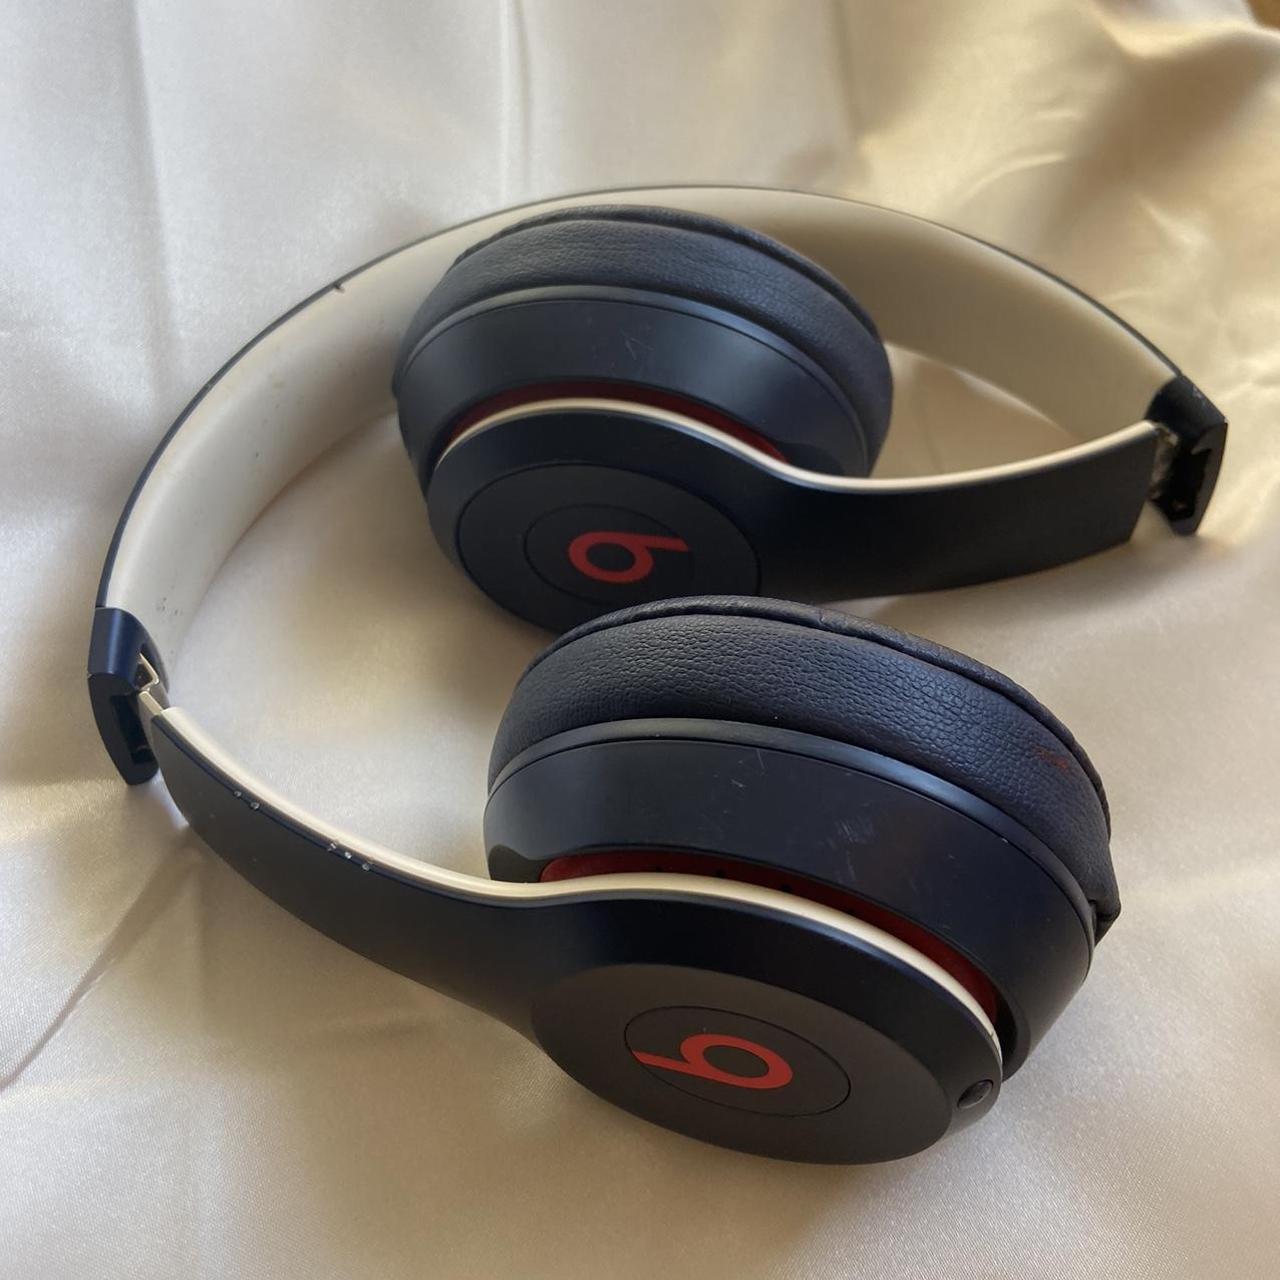 Product Image 1 - BEATS BY DRE in navy